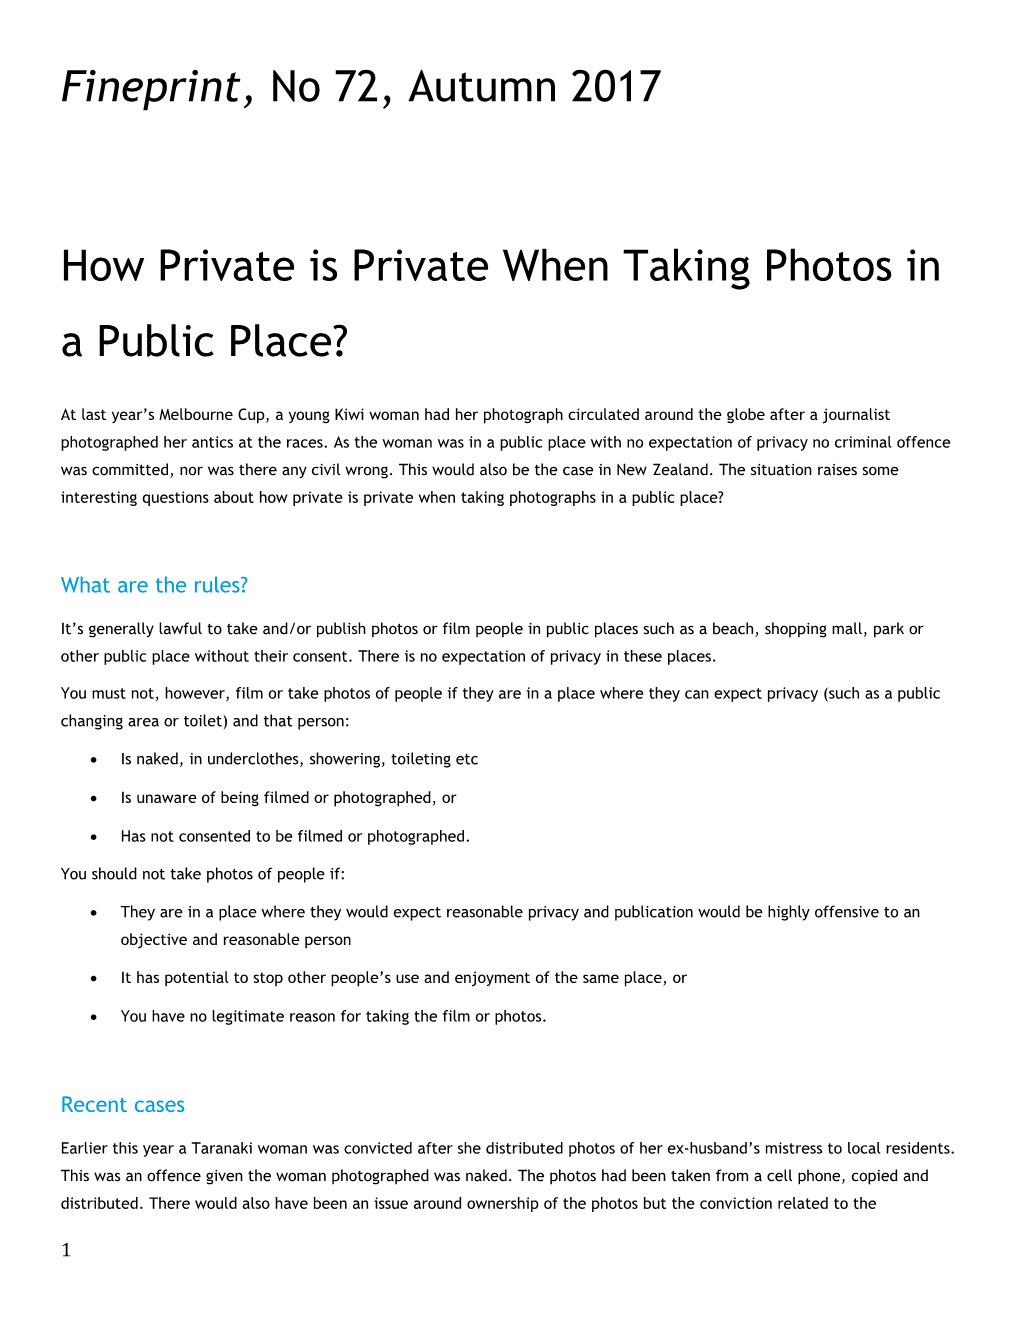 How Private Is Private When Taking Photos in a Public Place?